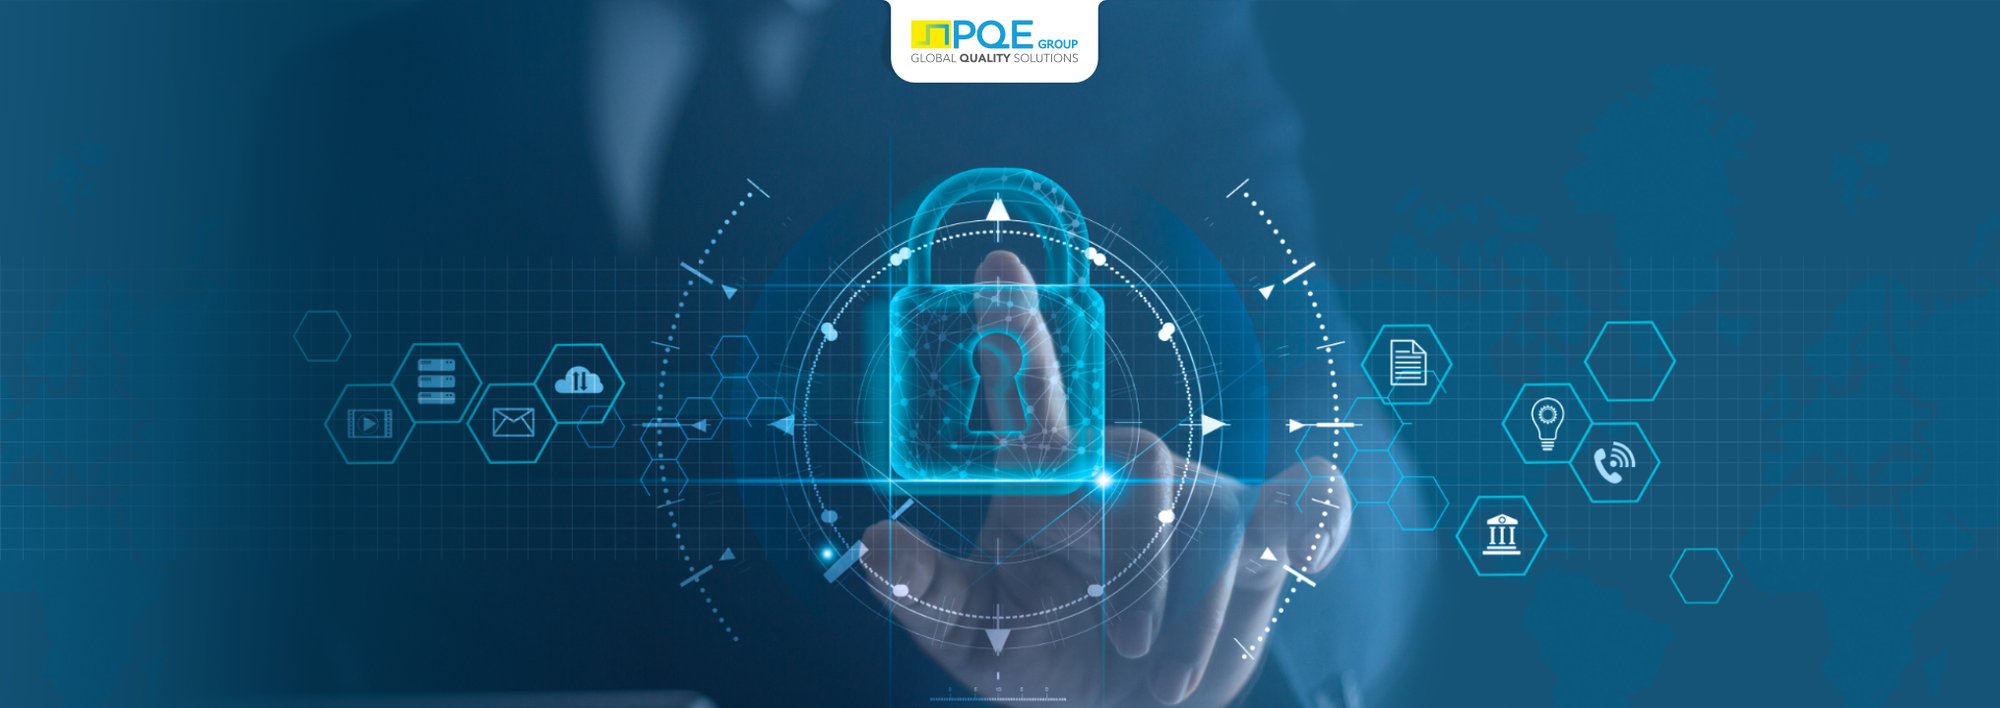 The controlled access management_PQE